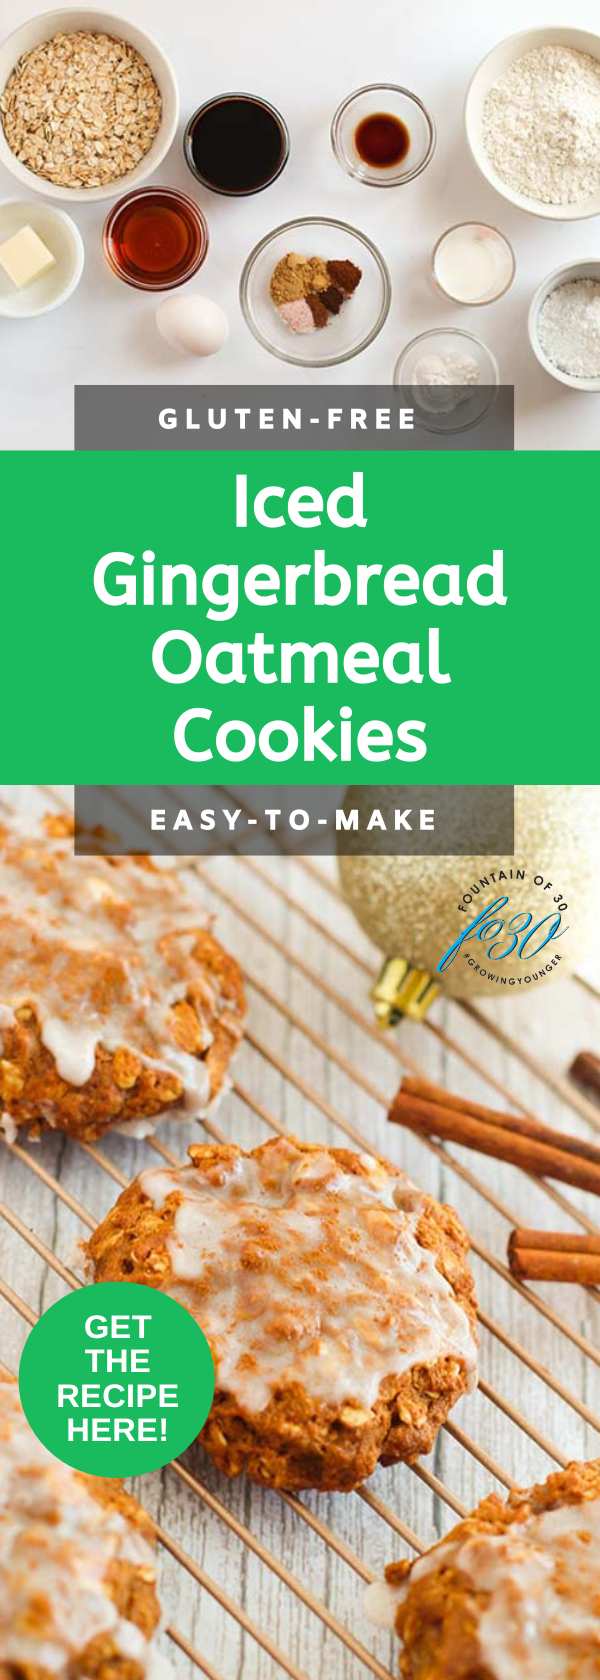 Gluten Free Iced Gingerbread Oatmeal Christmas Cookies fountainof30